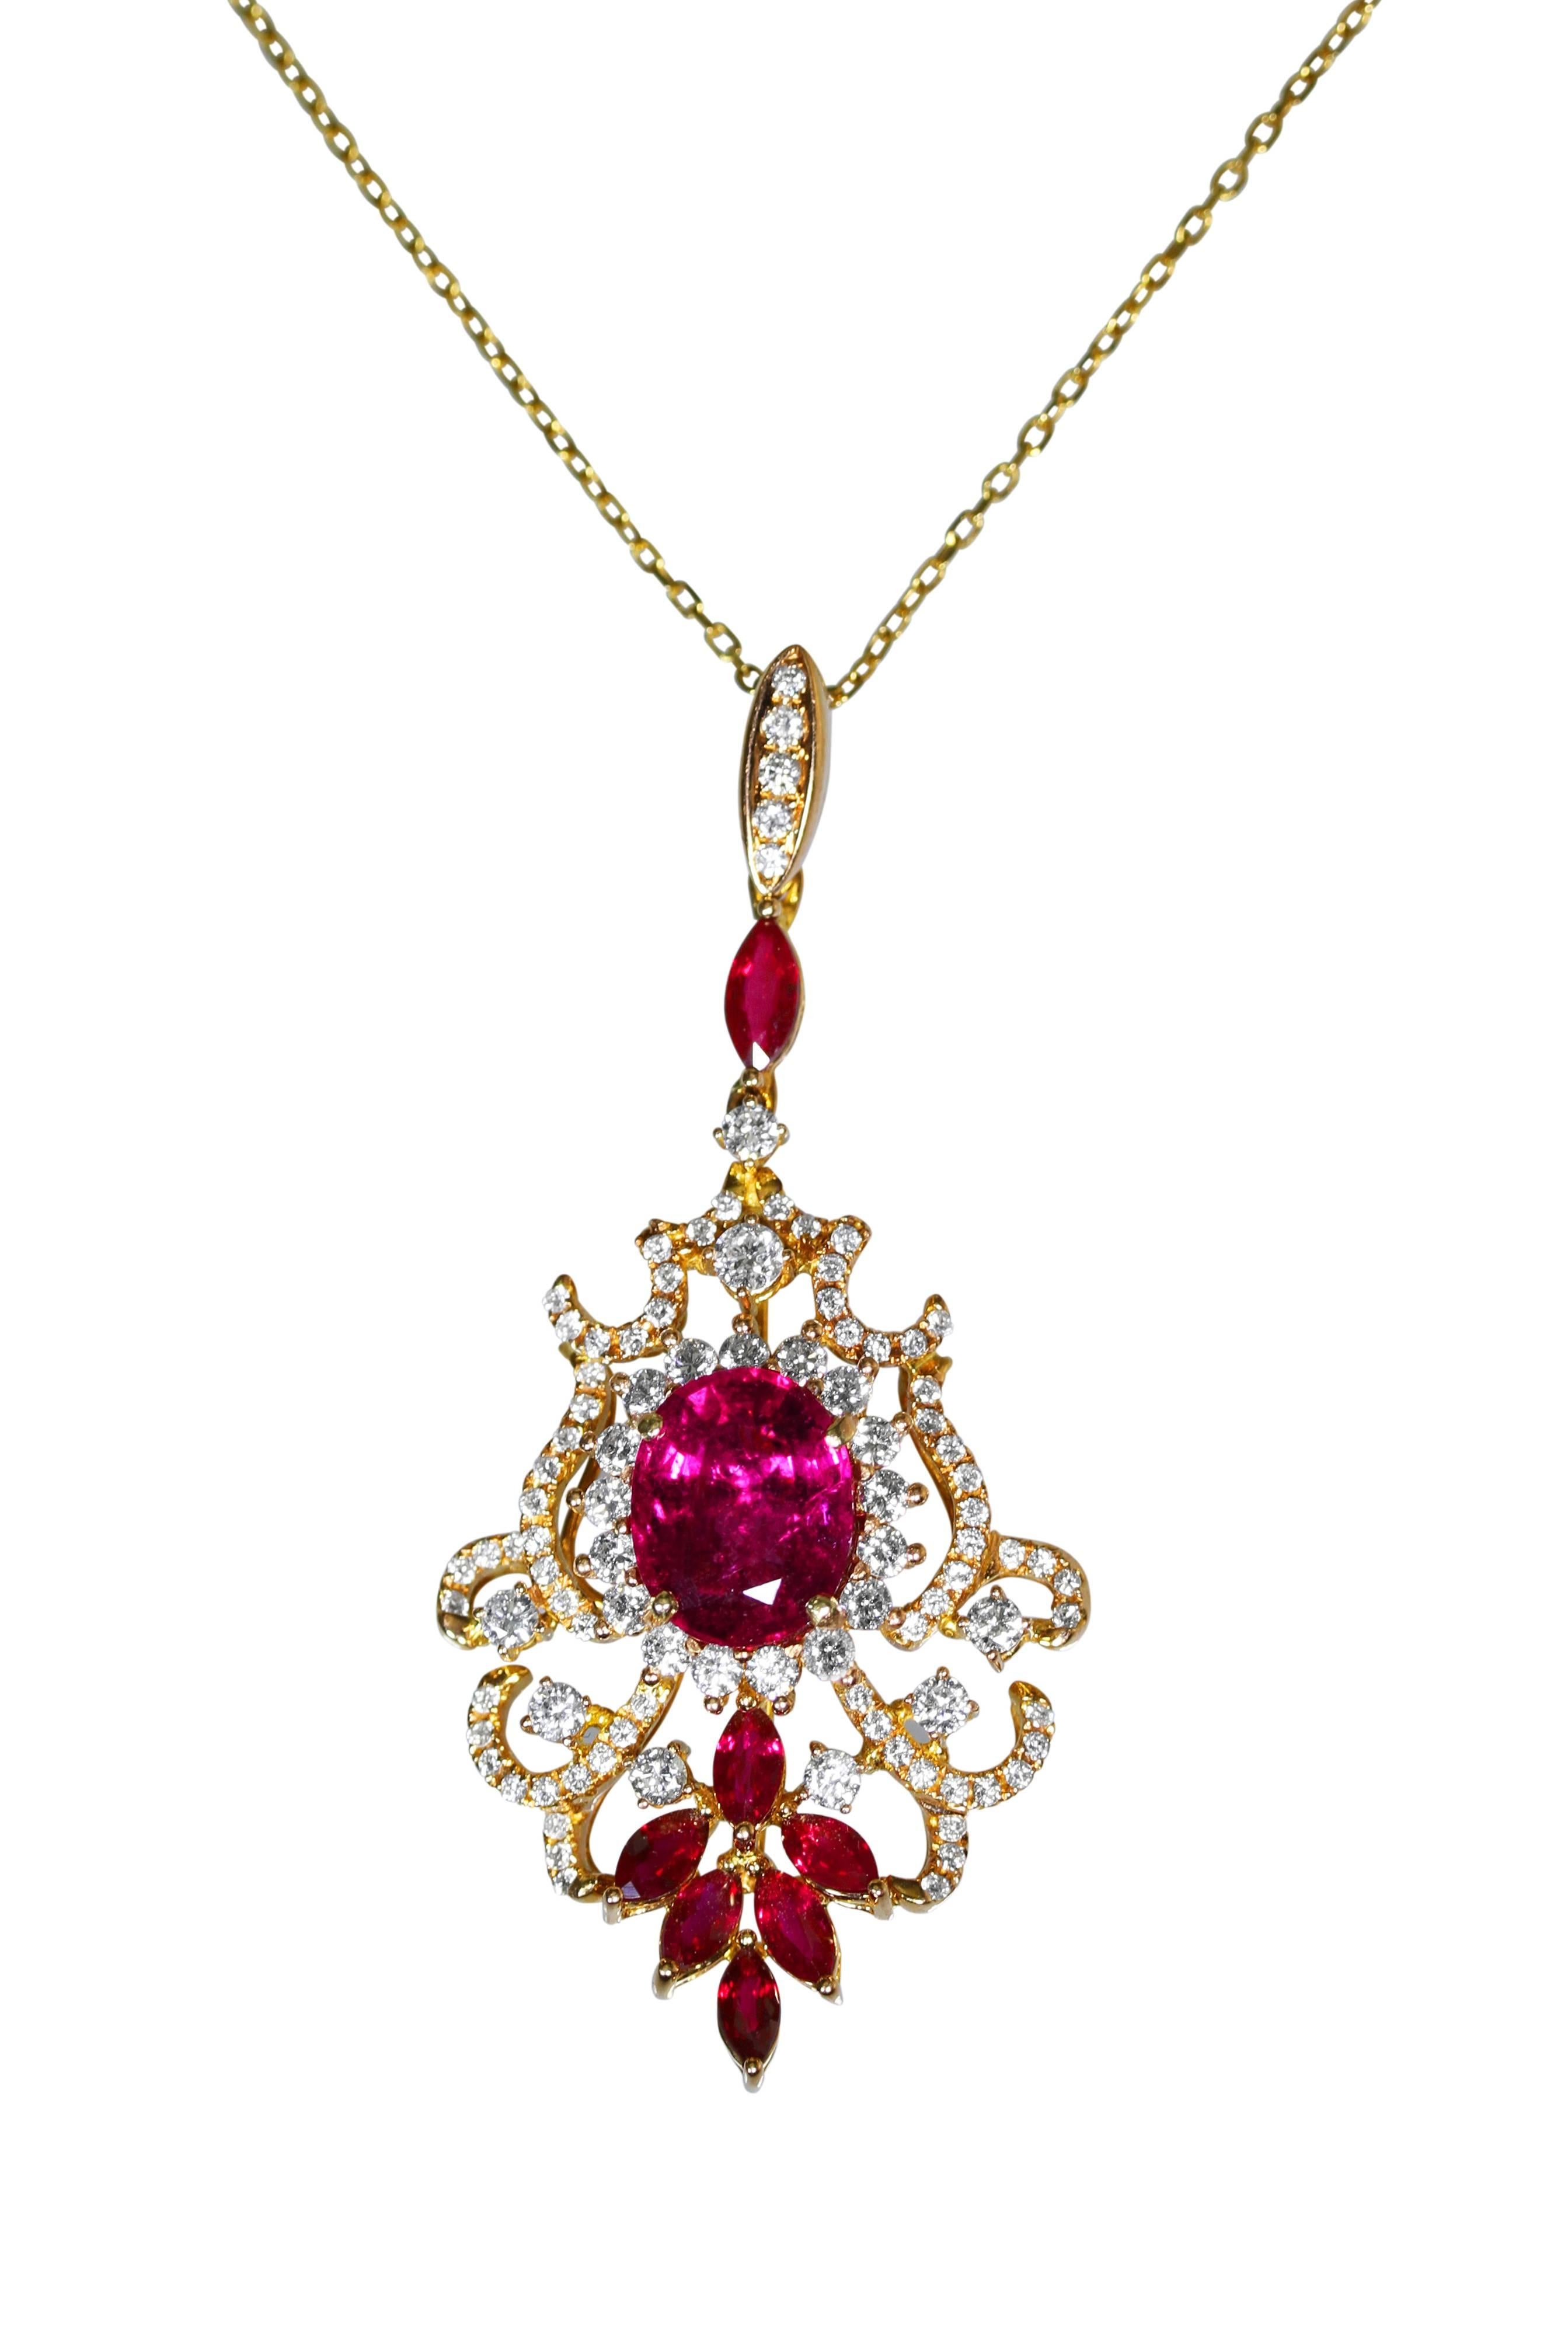 An 18 karat rose gold pendant of openwork scroll and foliate design set with an oval pink tourmaline weighing 2.75 carats, accented by 7 marquise-shaped rubies weighing approximately 1.40 carats, and 98 round diamonds weighing approximately 1.20